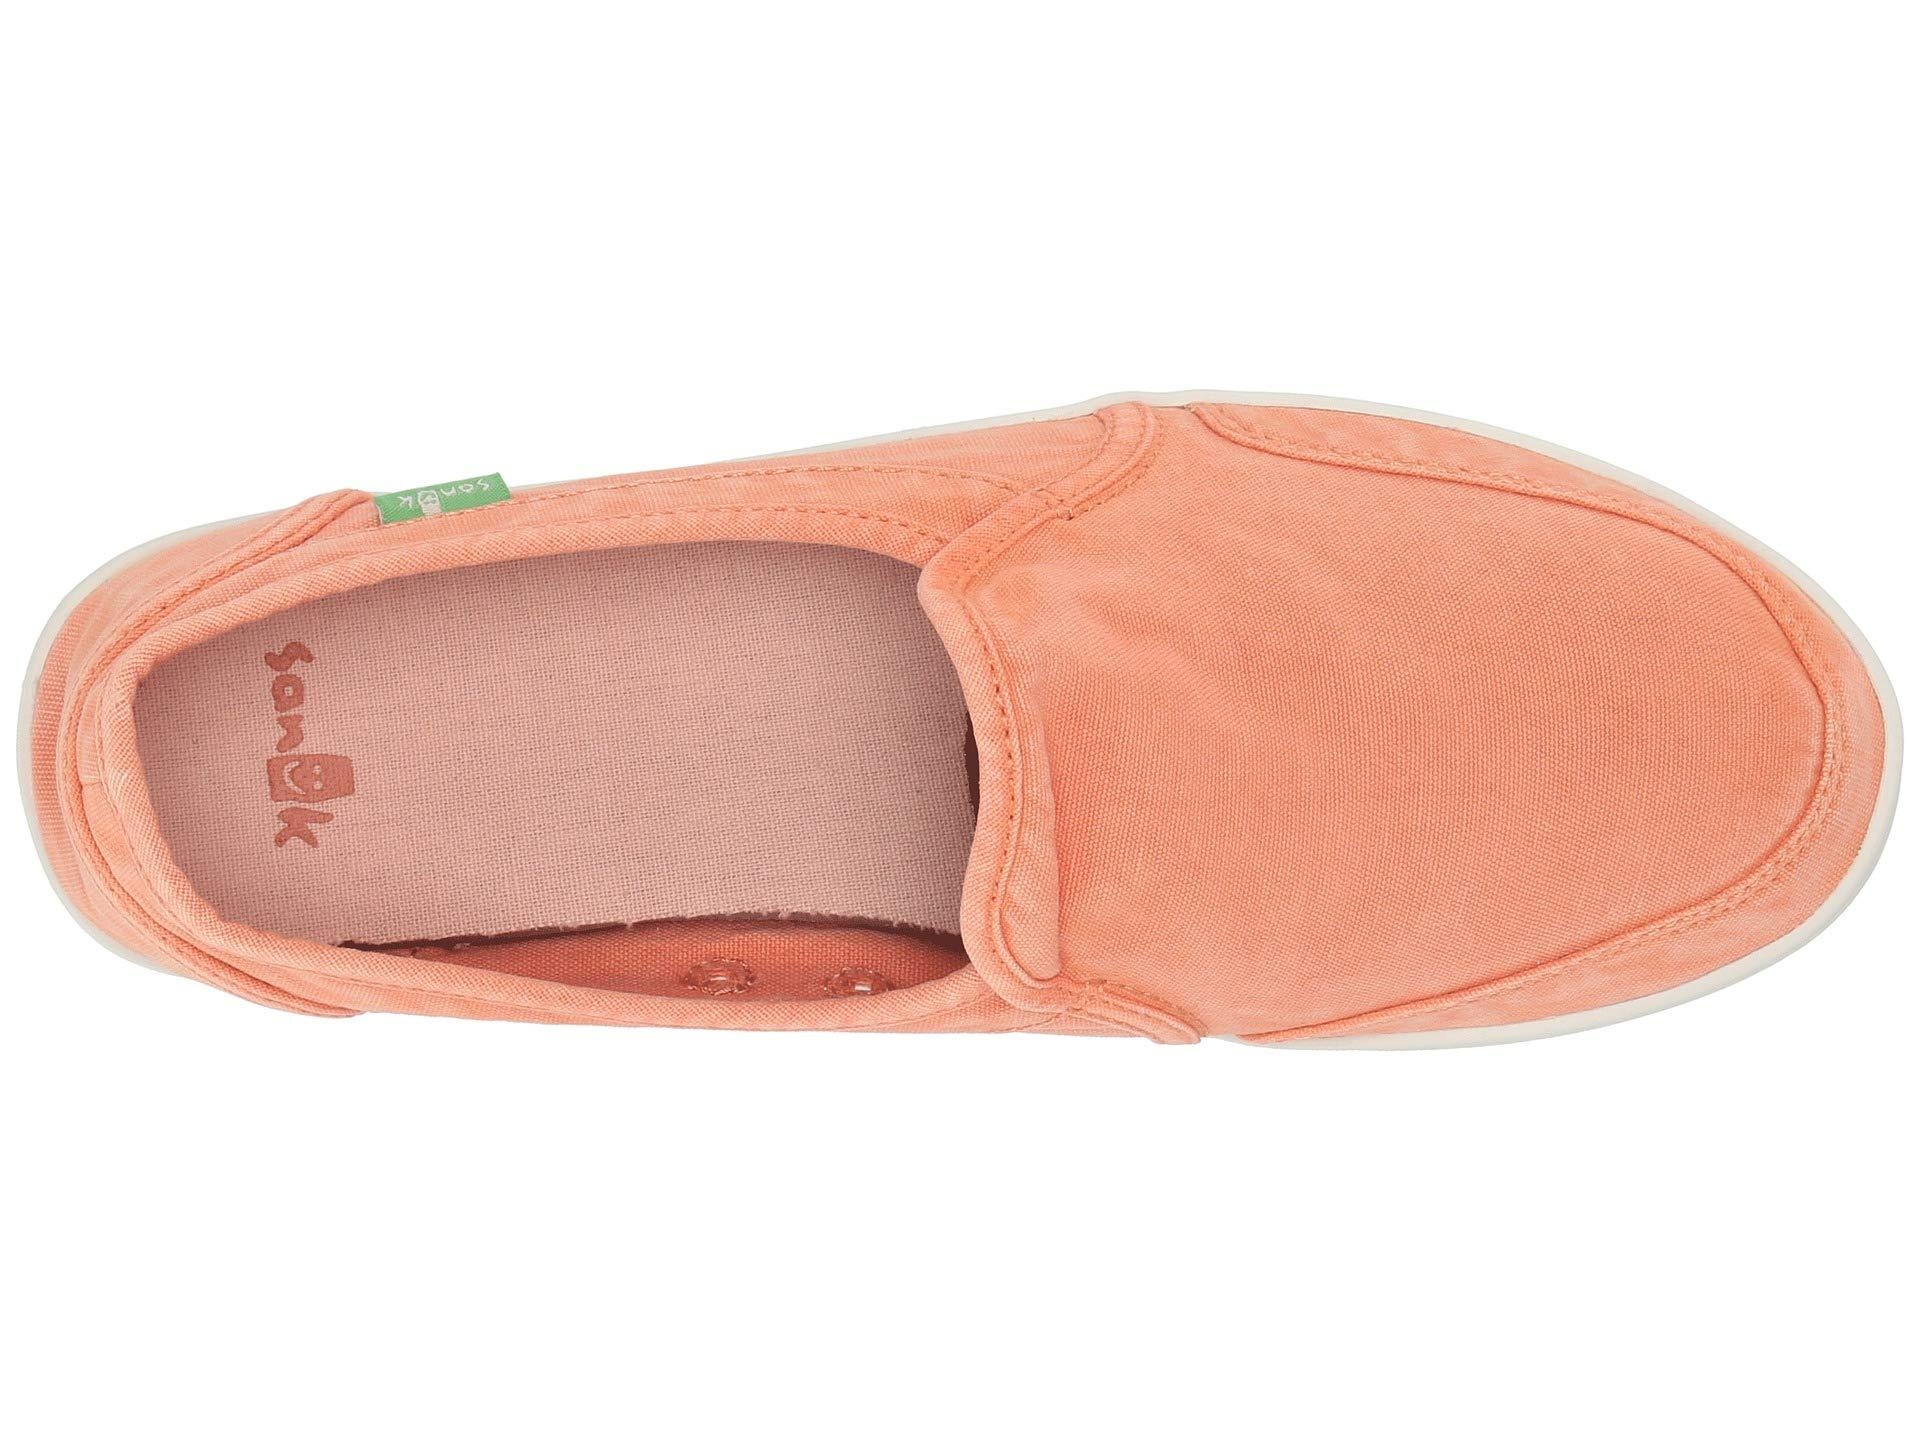 Sanuk Women's Pair O Dice Slip On Shoes - Coral - Medicine Hat-The Boarding  House